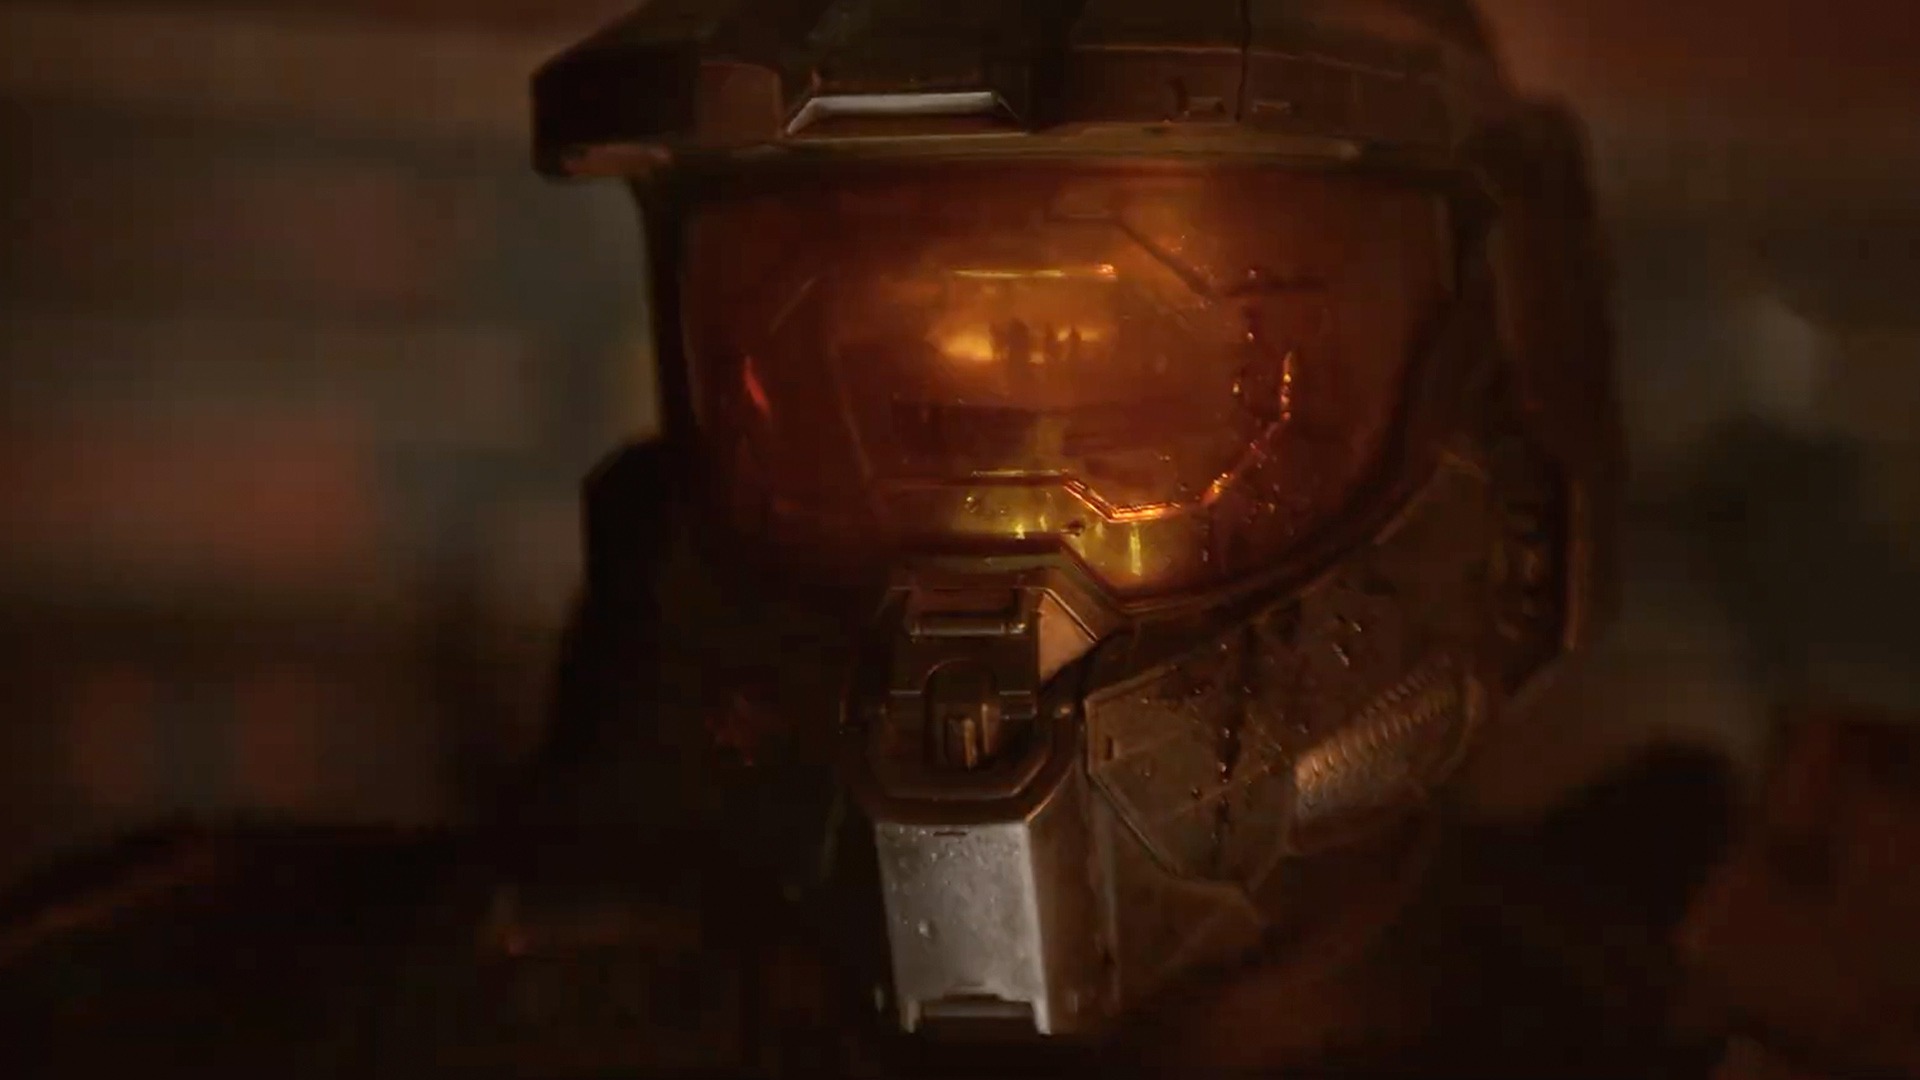 Halo TV series: Season 1's cast and trailers